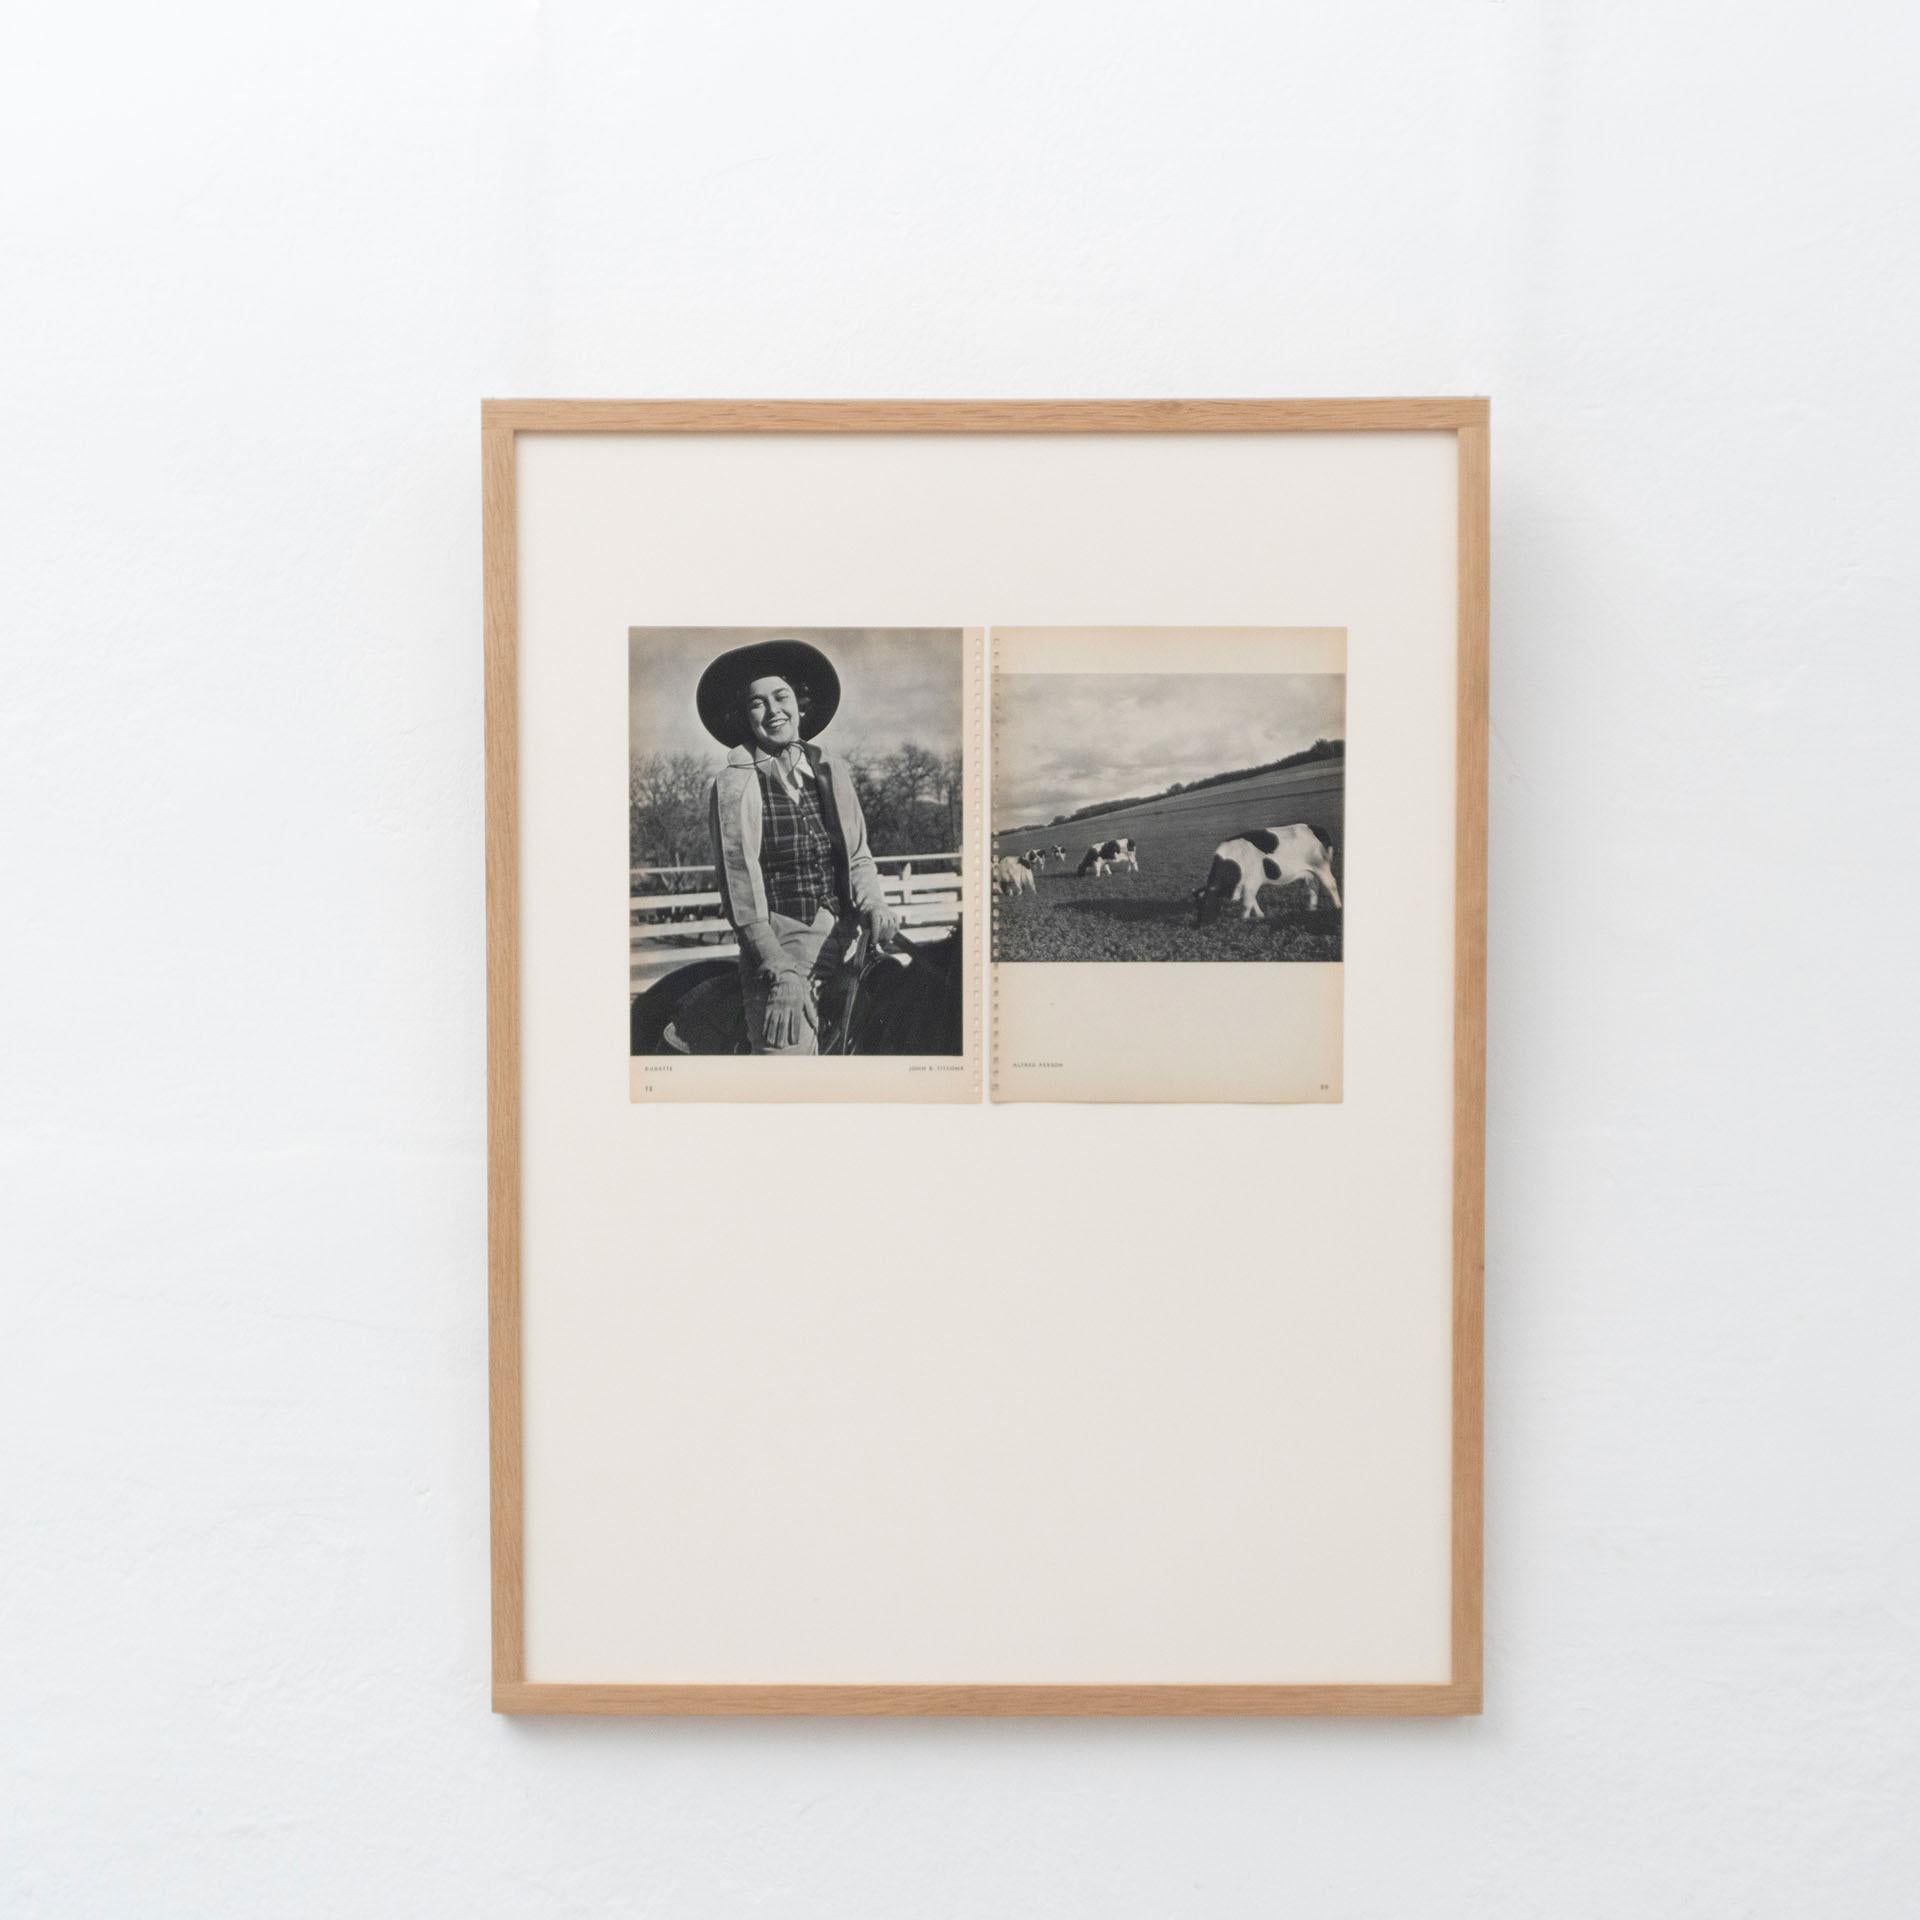 Vintage photo gravures by the photographers Jhon B. Titcomb and Alfred Person, circa 1940.
Wood frame with passepartout and high quality museum's glass.

In original condition, with minor wear consistent with age and use, preserving a beautiful